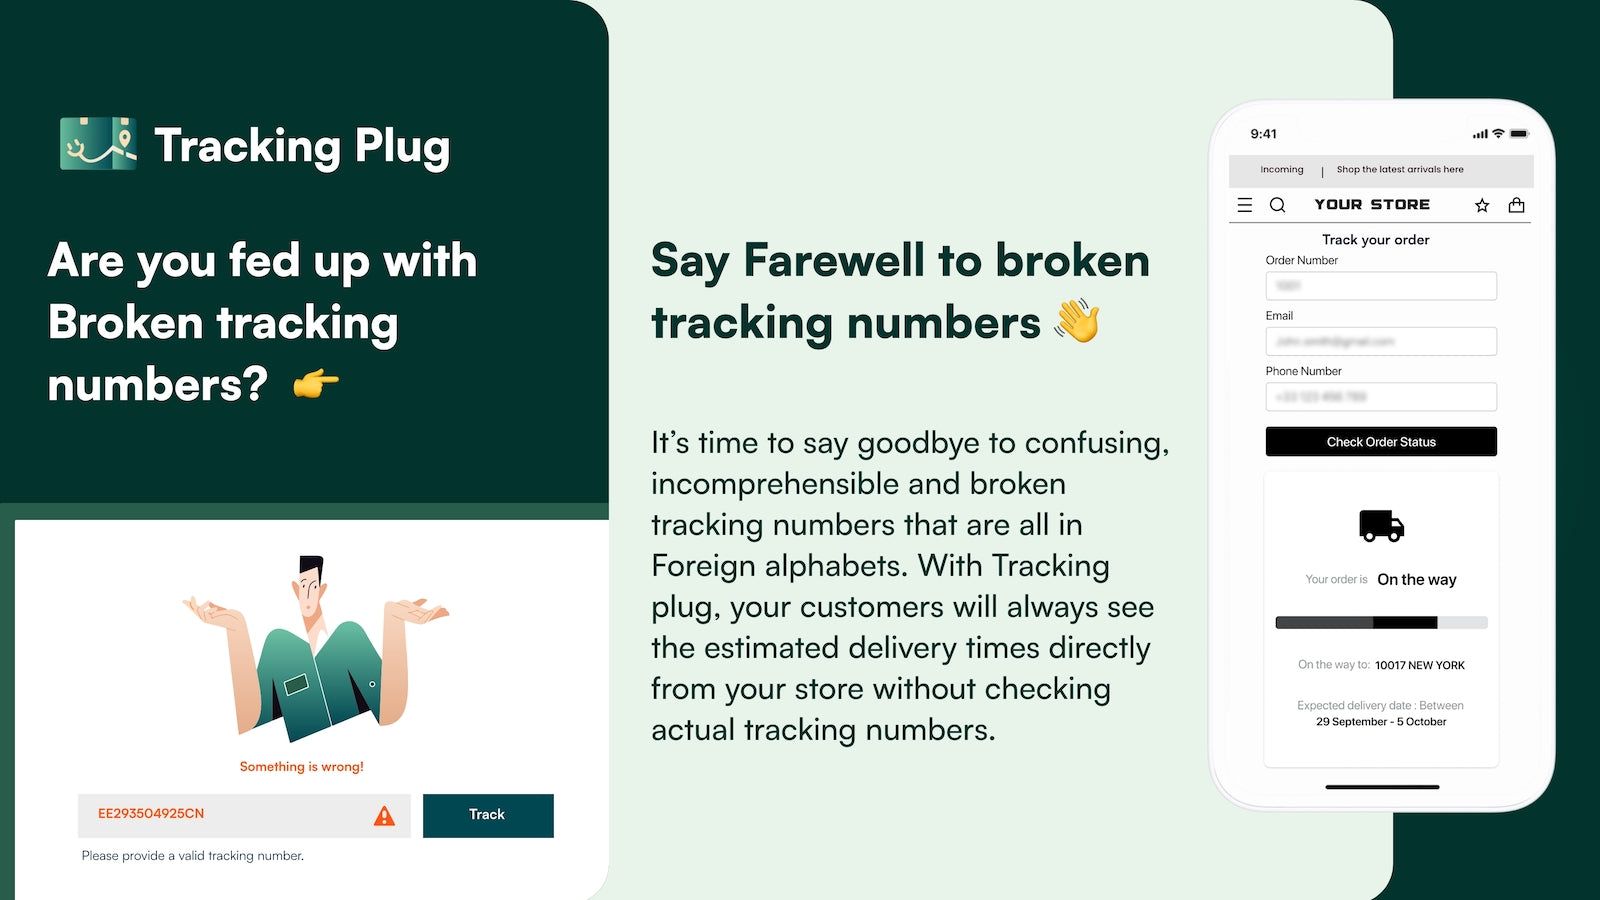 Say Farewell to broken tracking numbers